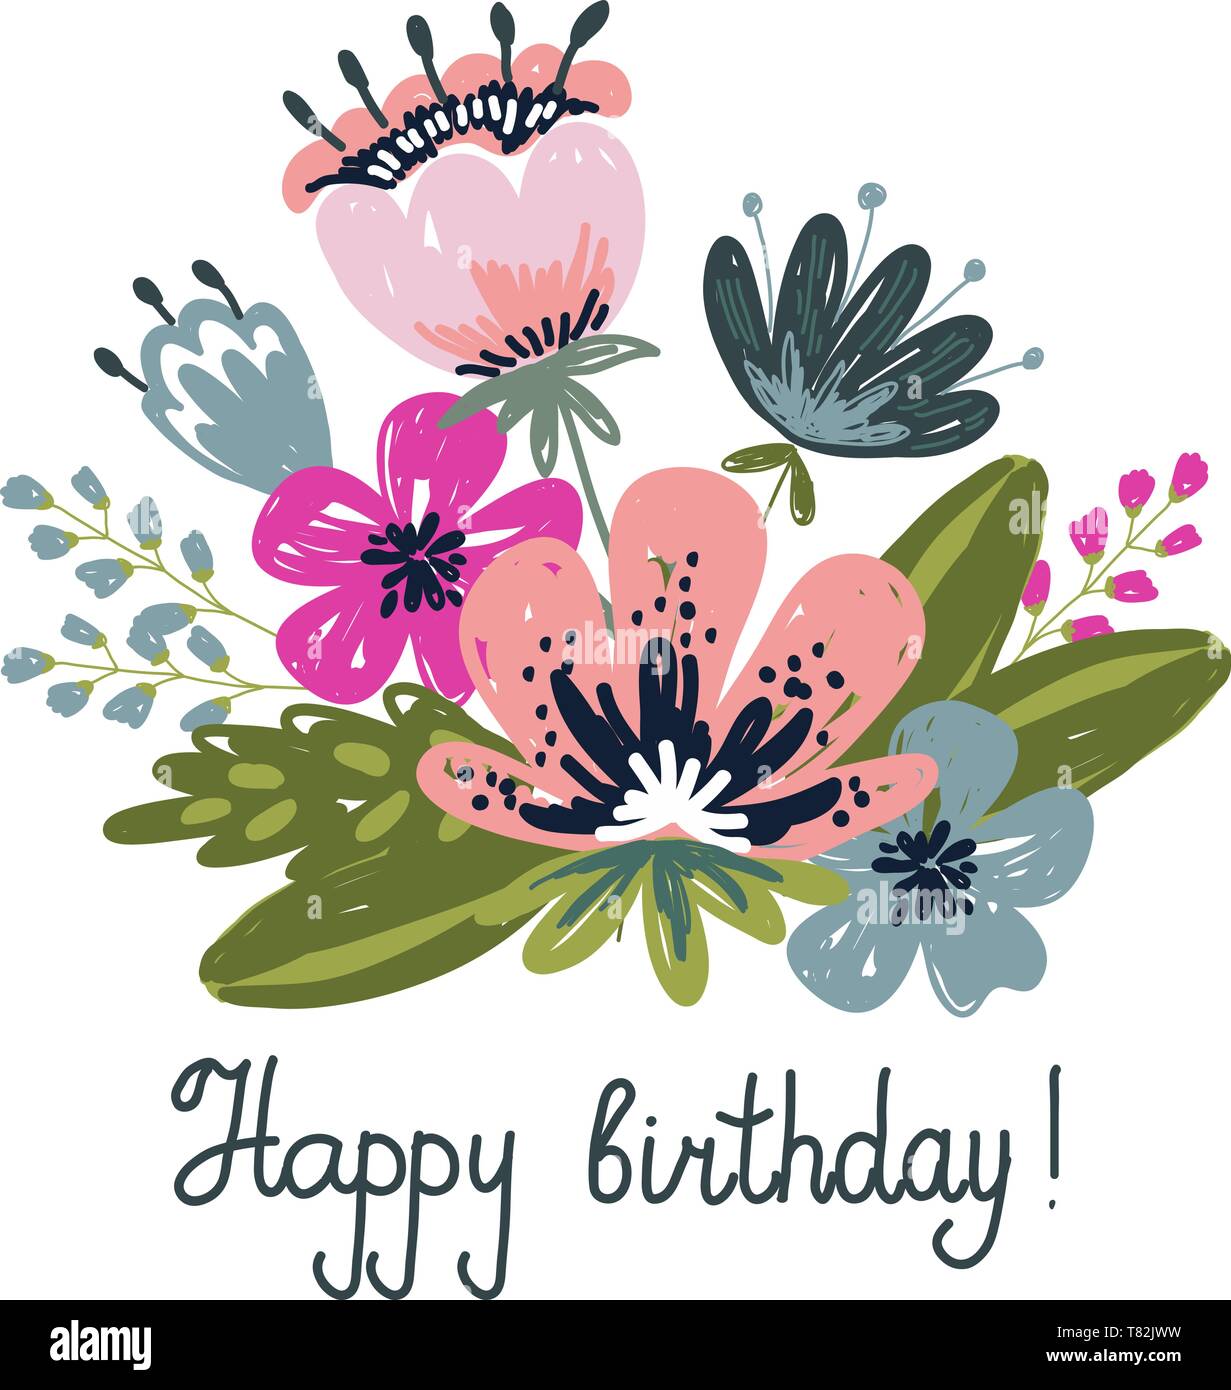 Greeting card Happy birthday. Hand drawng brush picture . Flowers ...